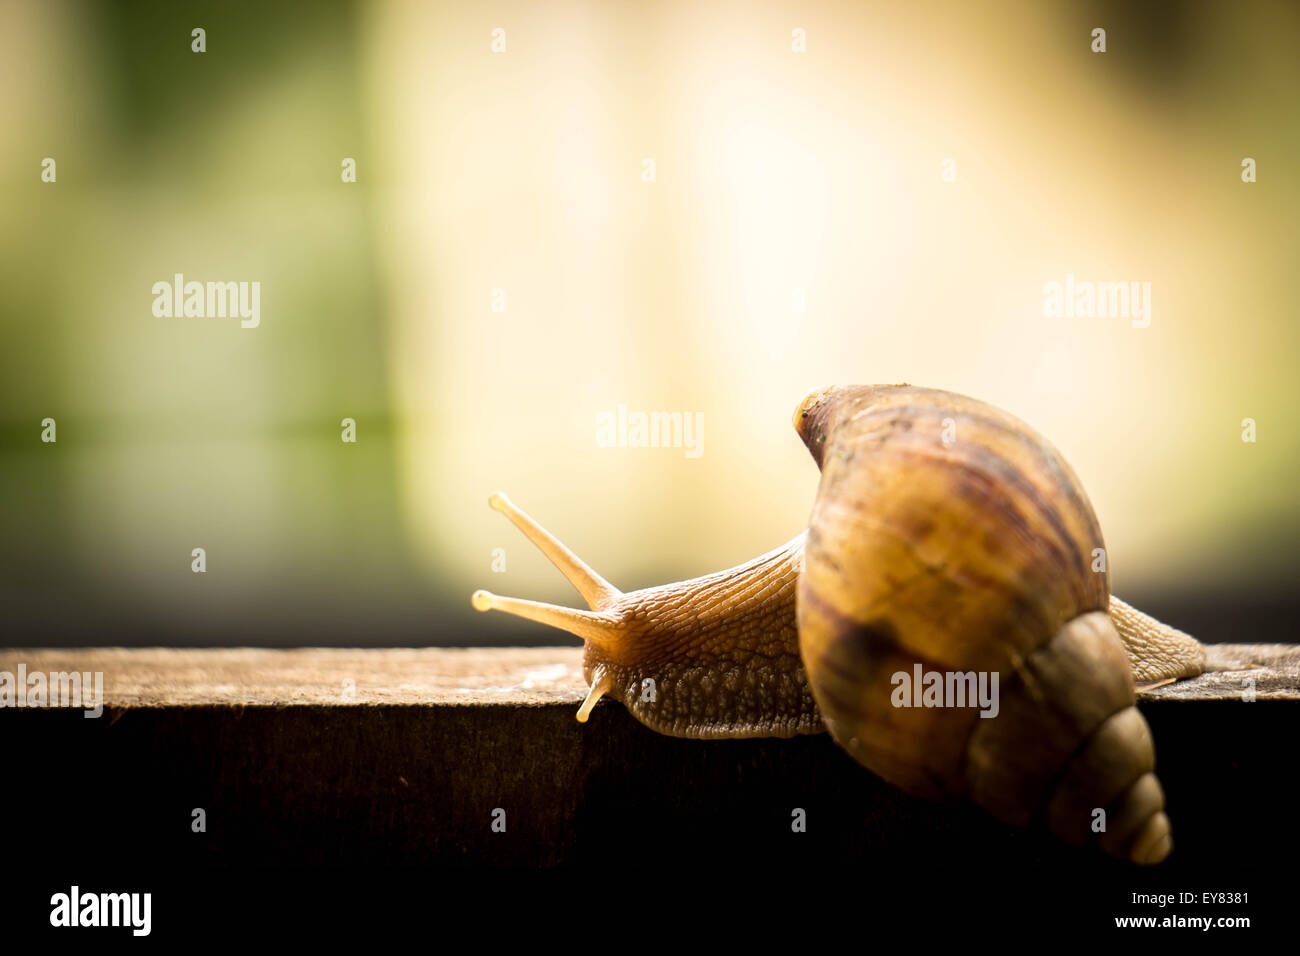 snail, slow, motion, roman, road, way, mollusk, wet, helix, two, conical, copy, spring Stock Photo